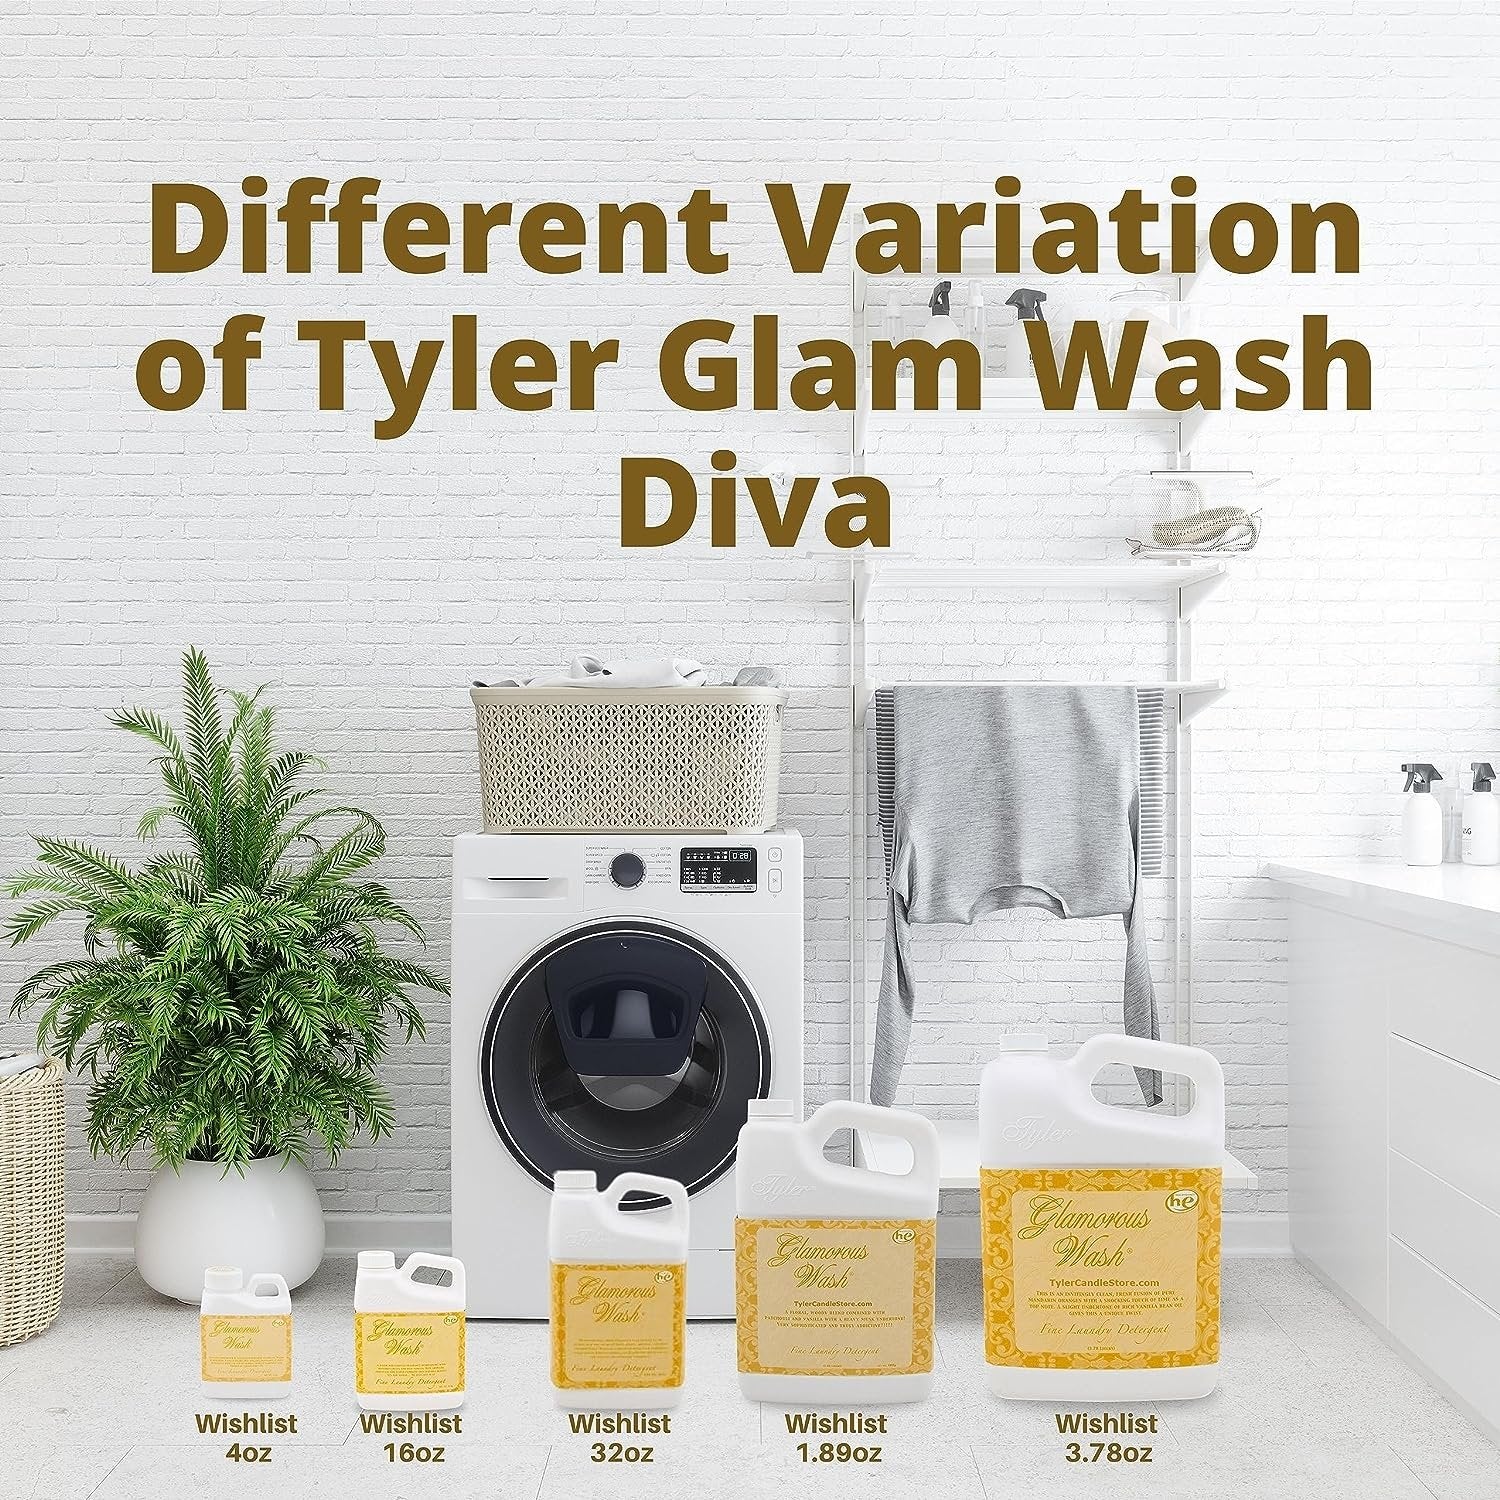 Worldwide Nutrition Bundle, 2 Items: Tyler Glamorous Wash Wishlist Scent Fine Laundry Liquid Detergent - Hand and Machine Washable - 907g (32 Fl Oz) Container and Multi-Purpose Key Chain